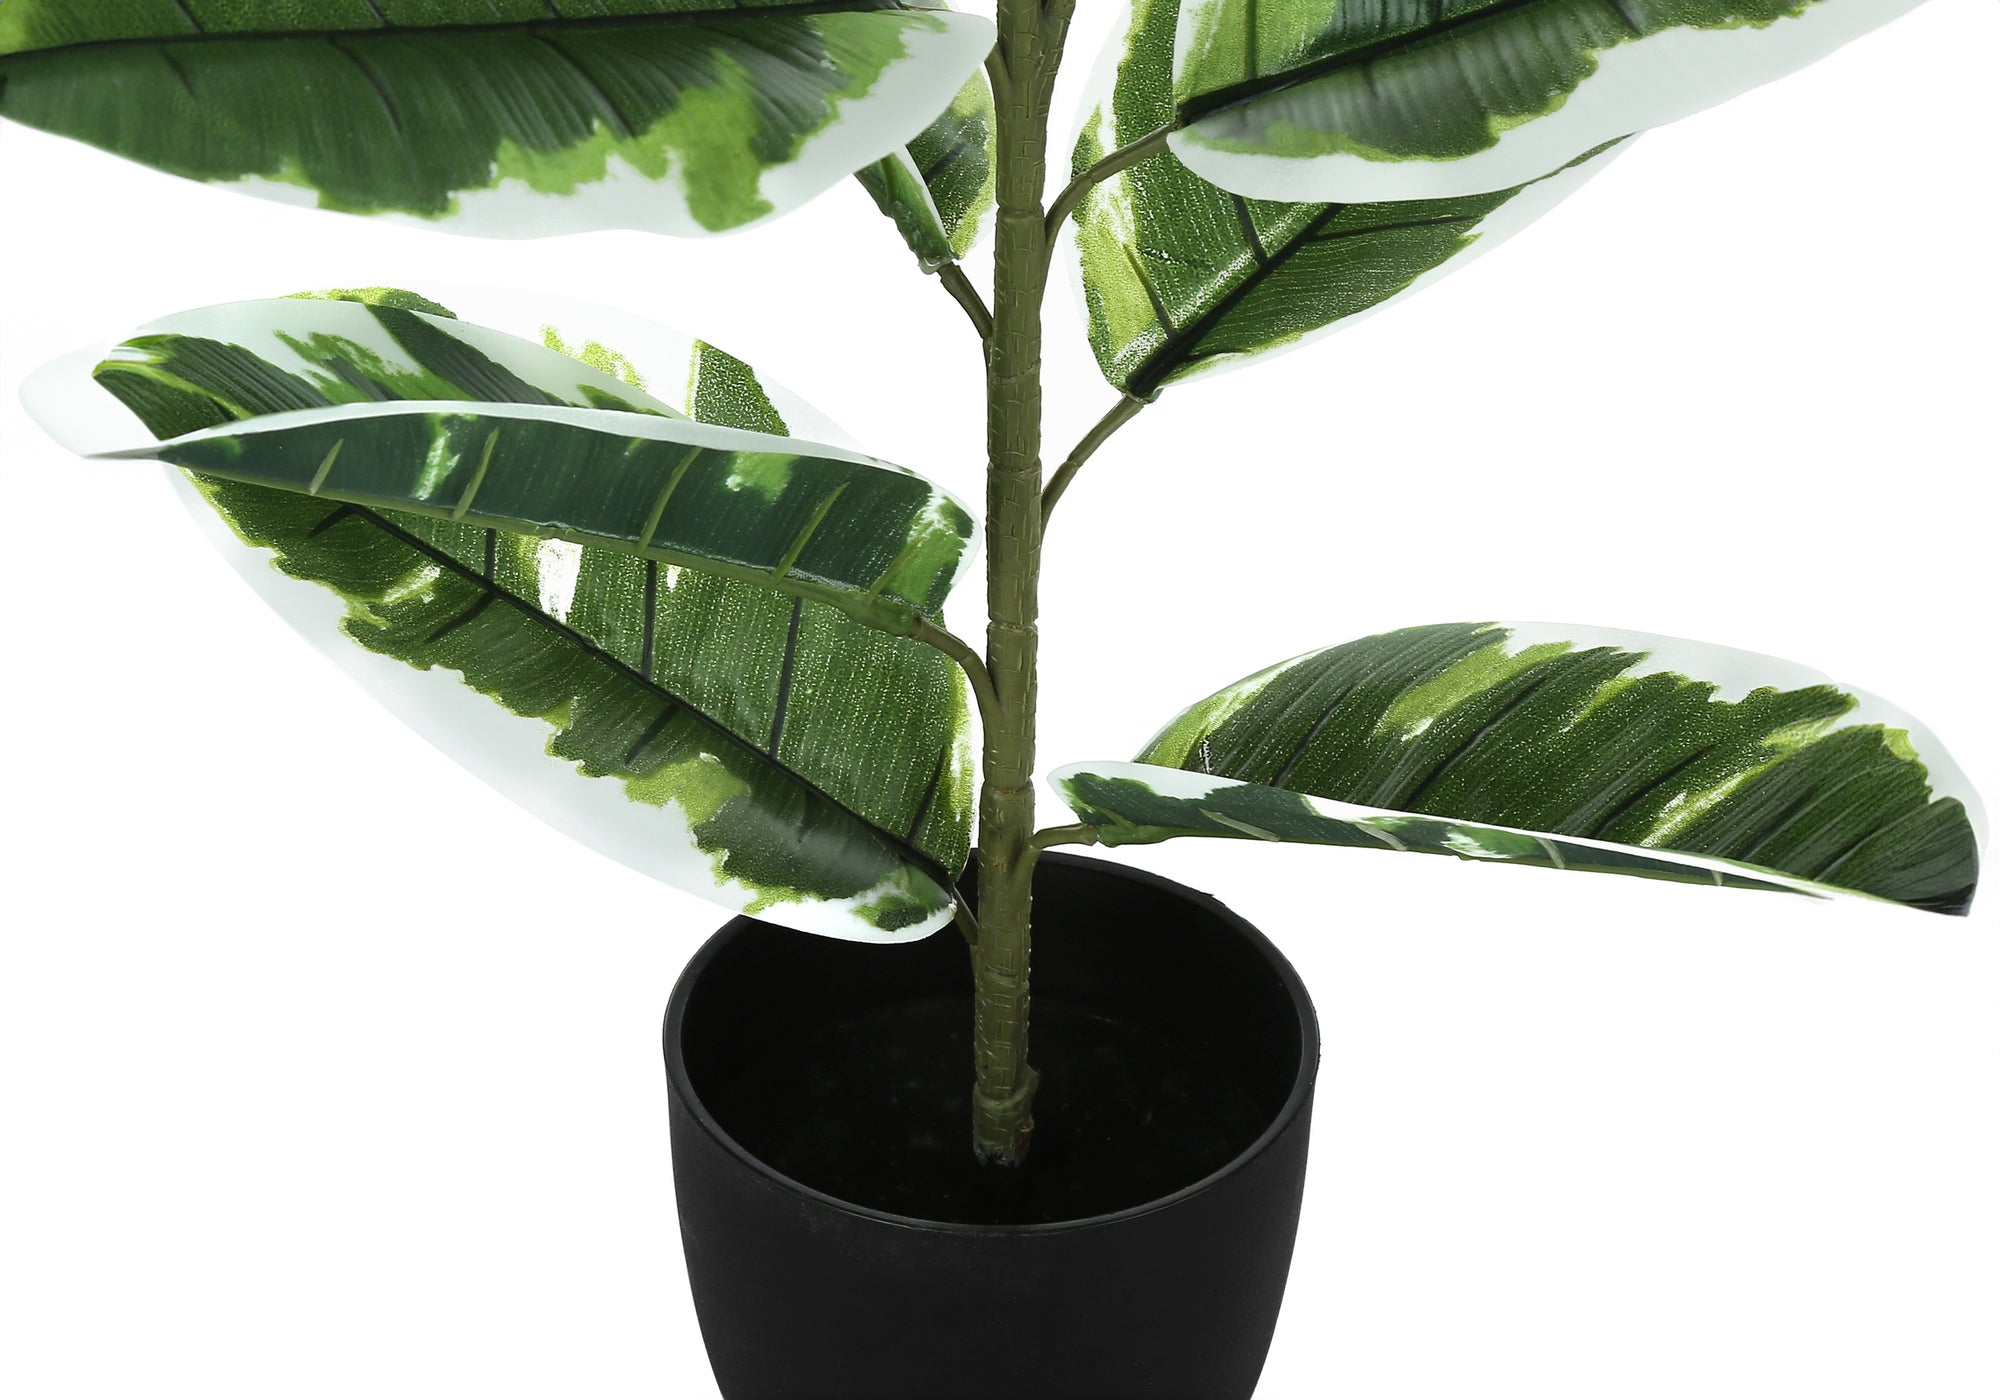 ARTIFICIAL PLANT - 27"H / INDOOR RUBBER IN A 5" POT